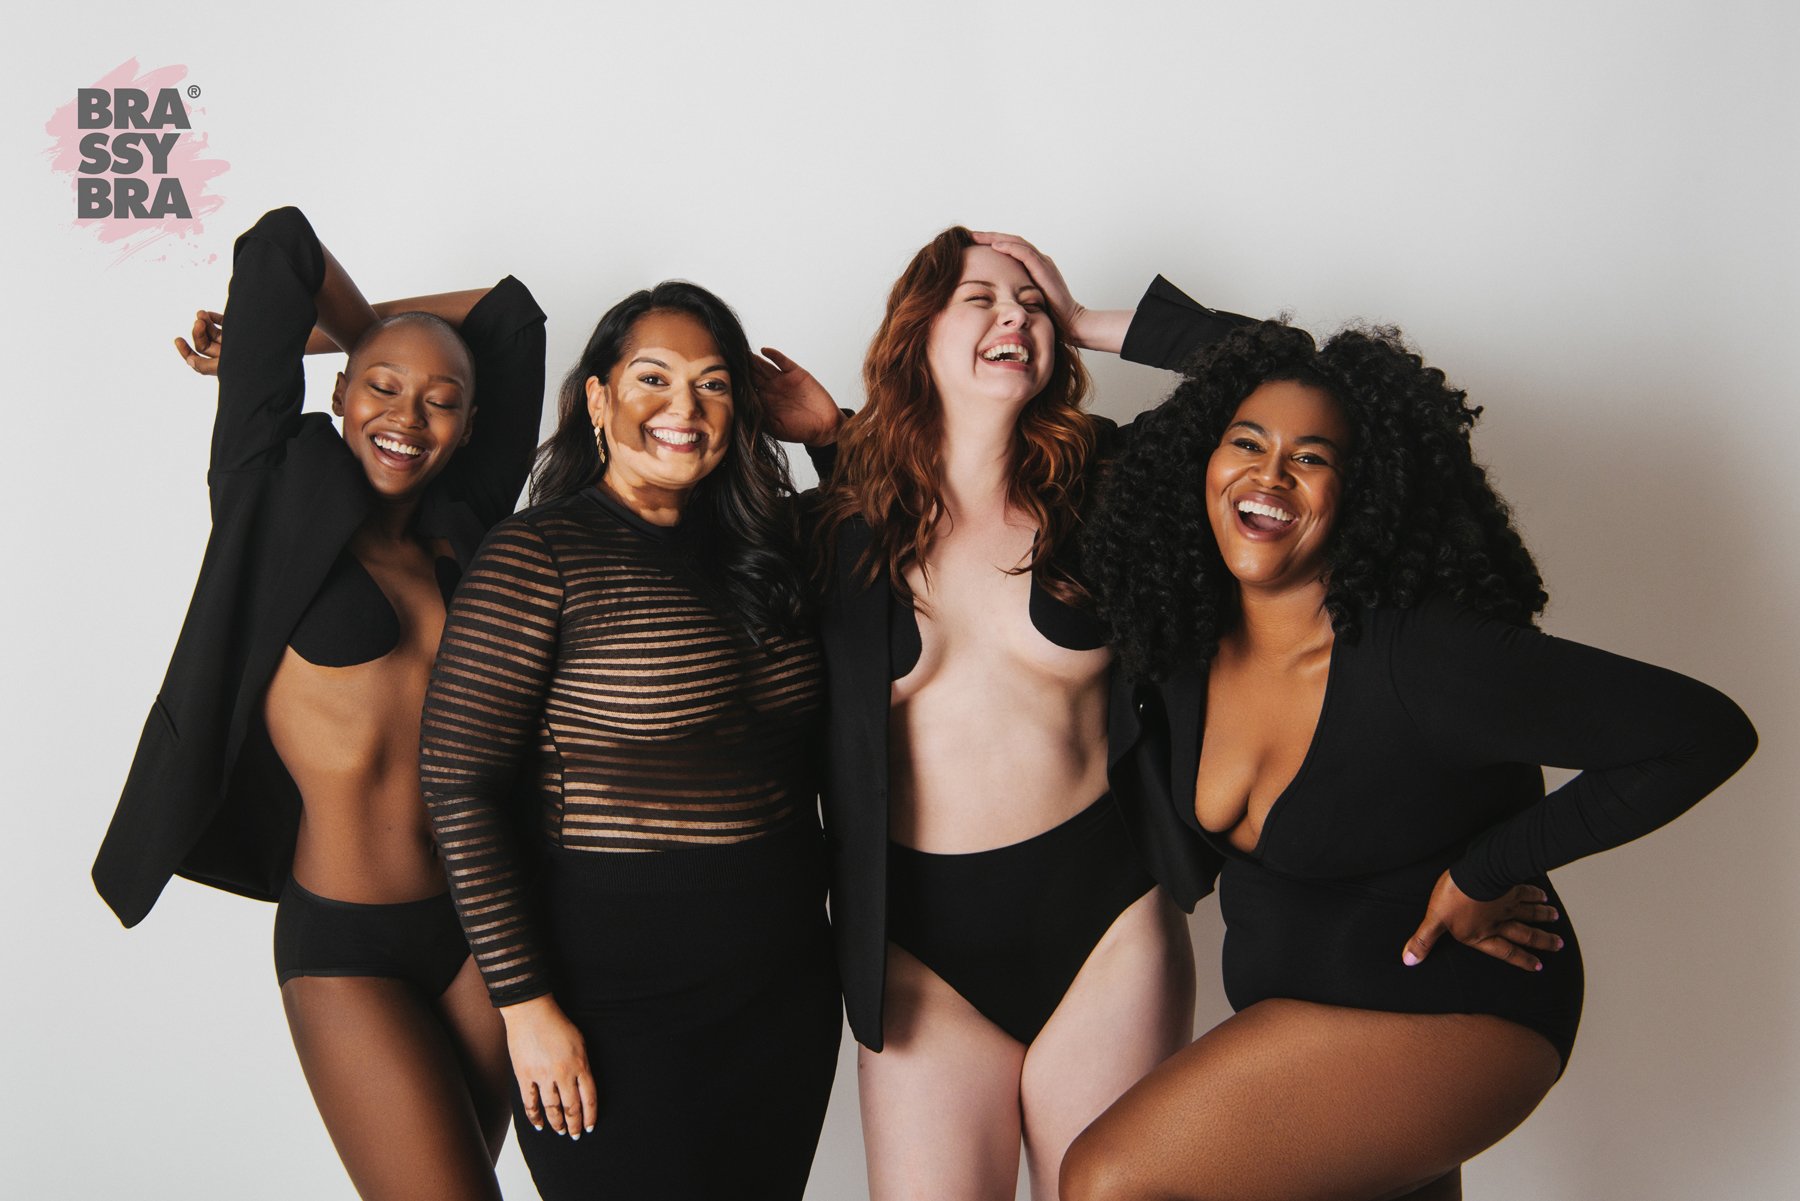 The Brassybra and Plus Size Boobs: Do They Do the Trick!?